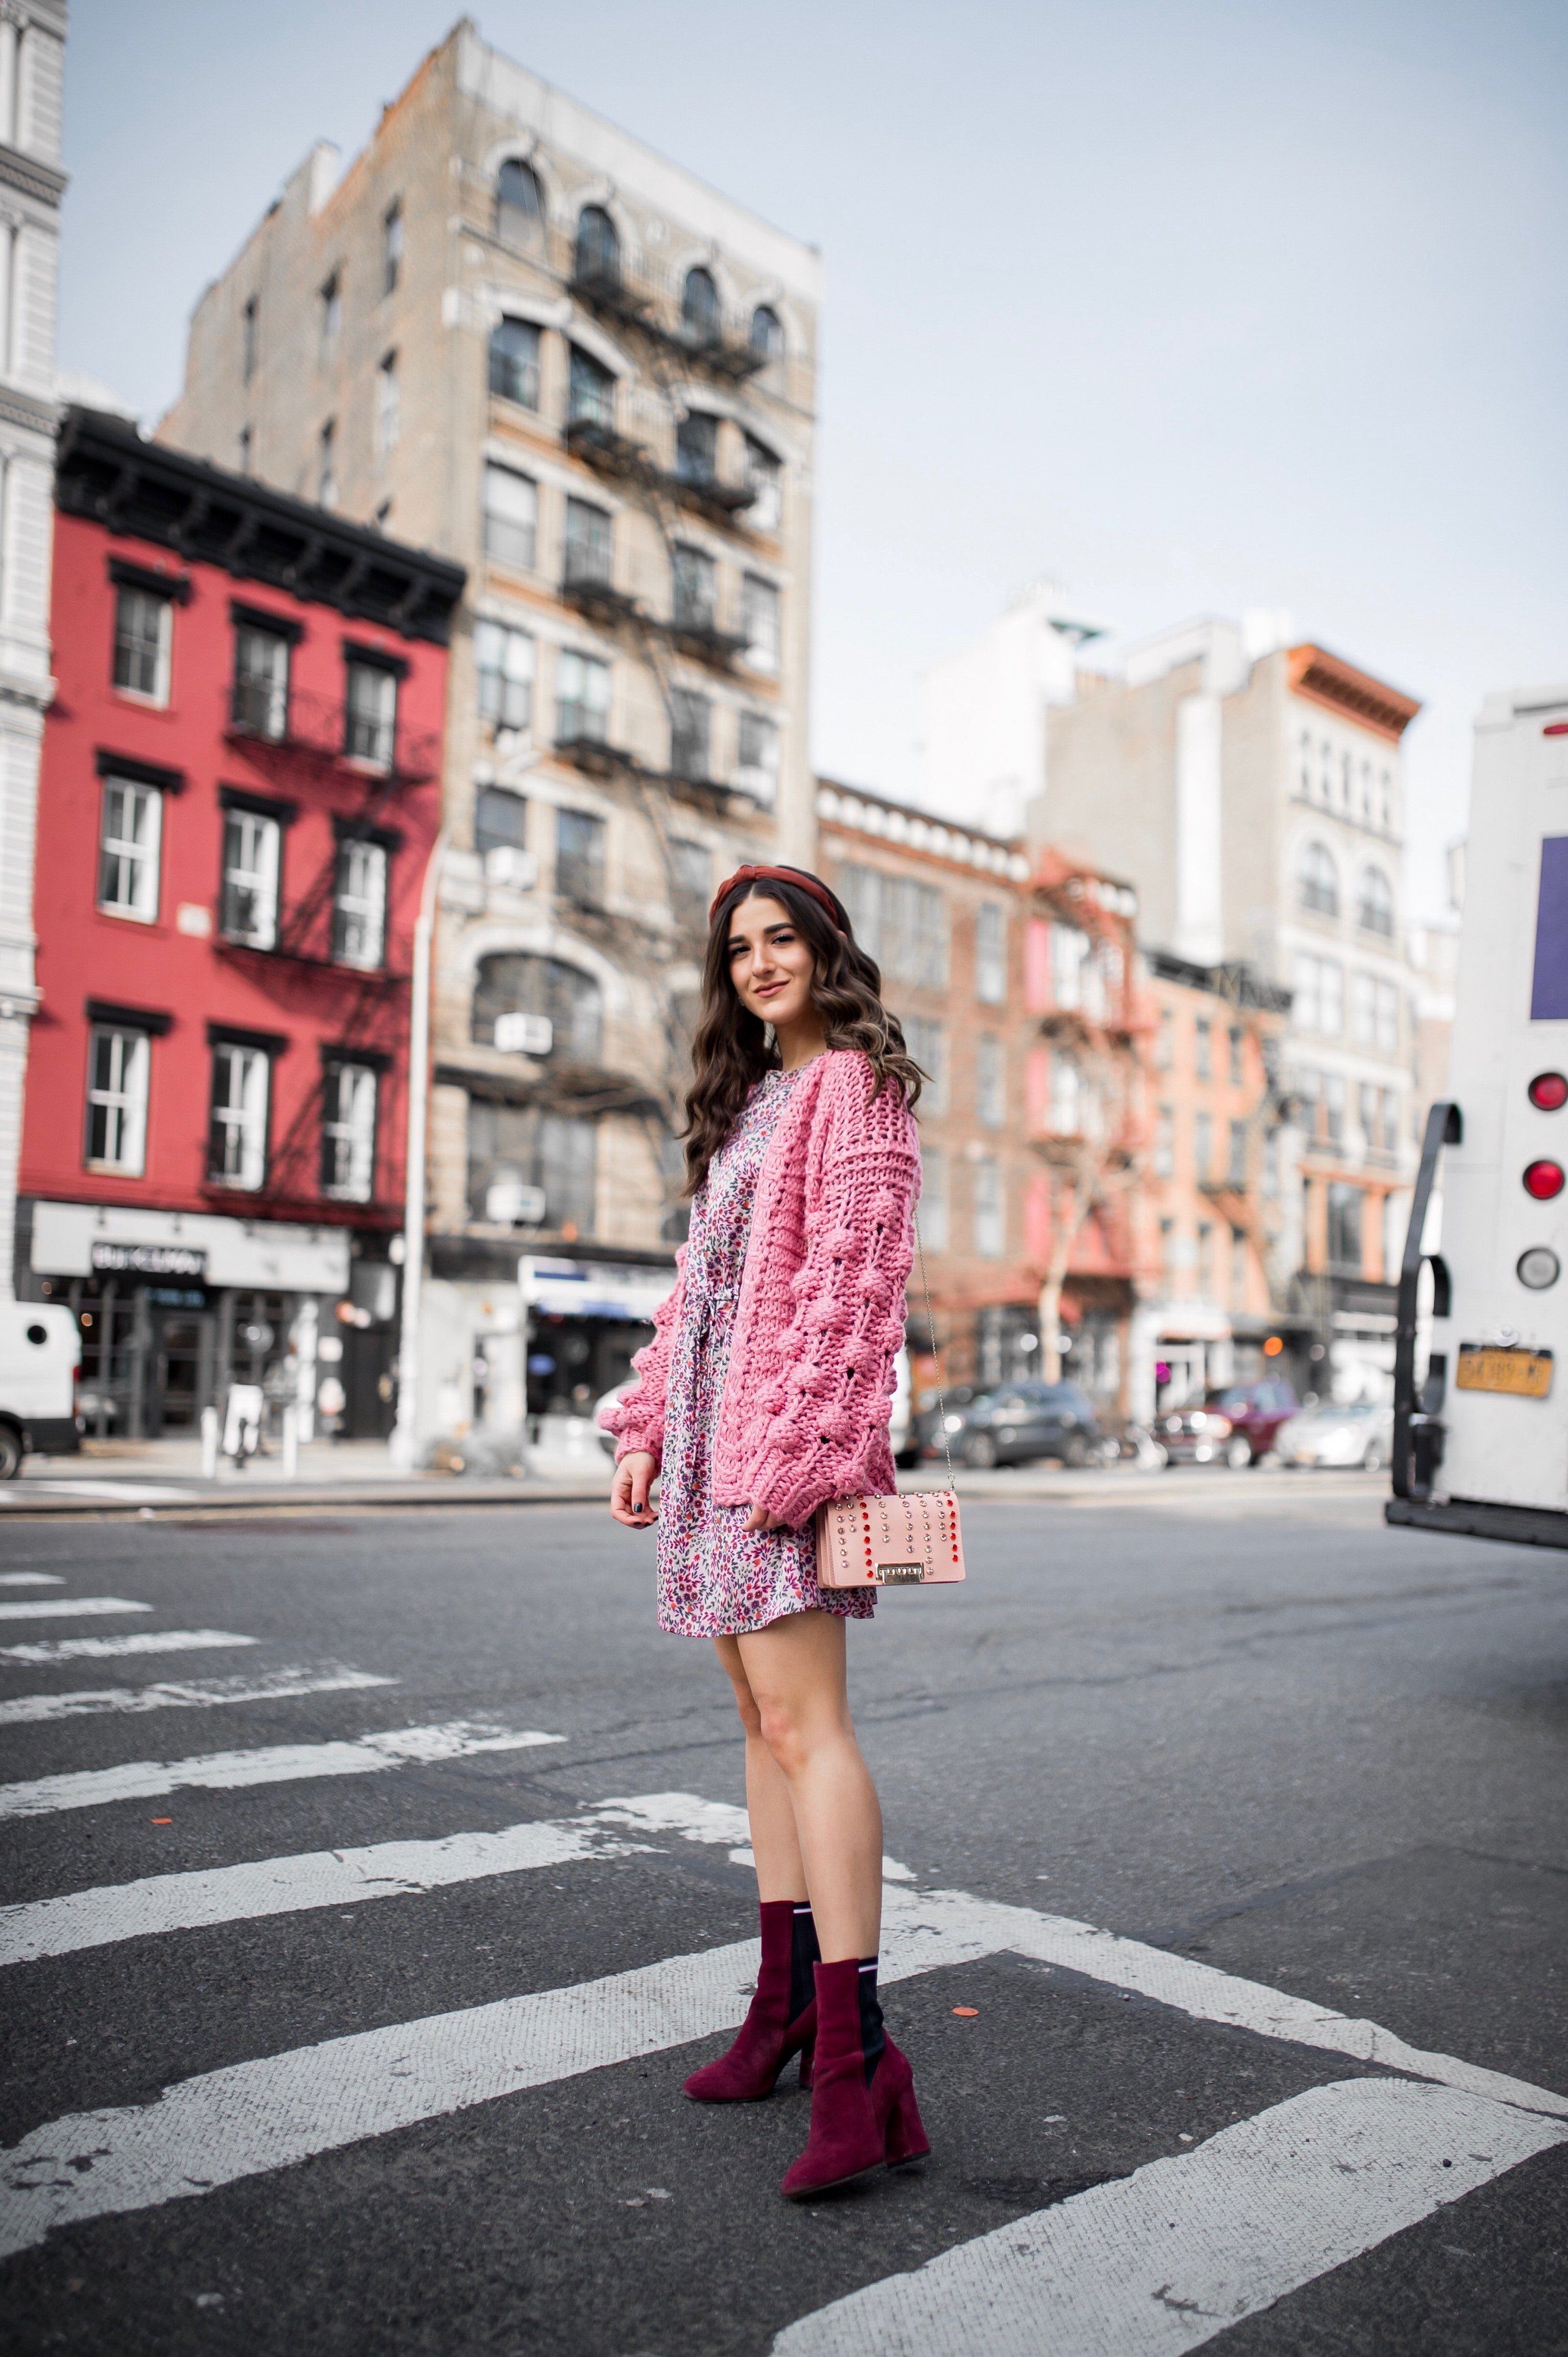 How Being In A Miserable Job Shaped My Entire Career Silk Floral Dress + Pink Pom Pom Sweater Esther Santer Fashion Blog NYC Street Style Blogger Outfit OOTD Trendy Shopping Mango Sale Winter How To Wear Maroon Velvet Booties Zac Posen Swarovski Bag.jpg